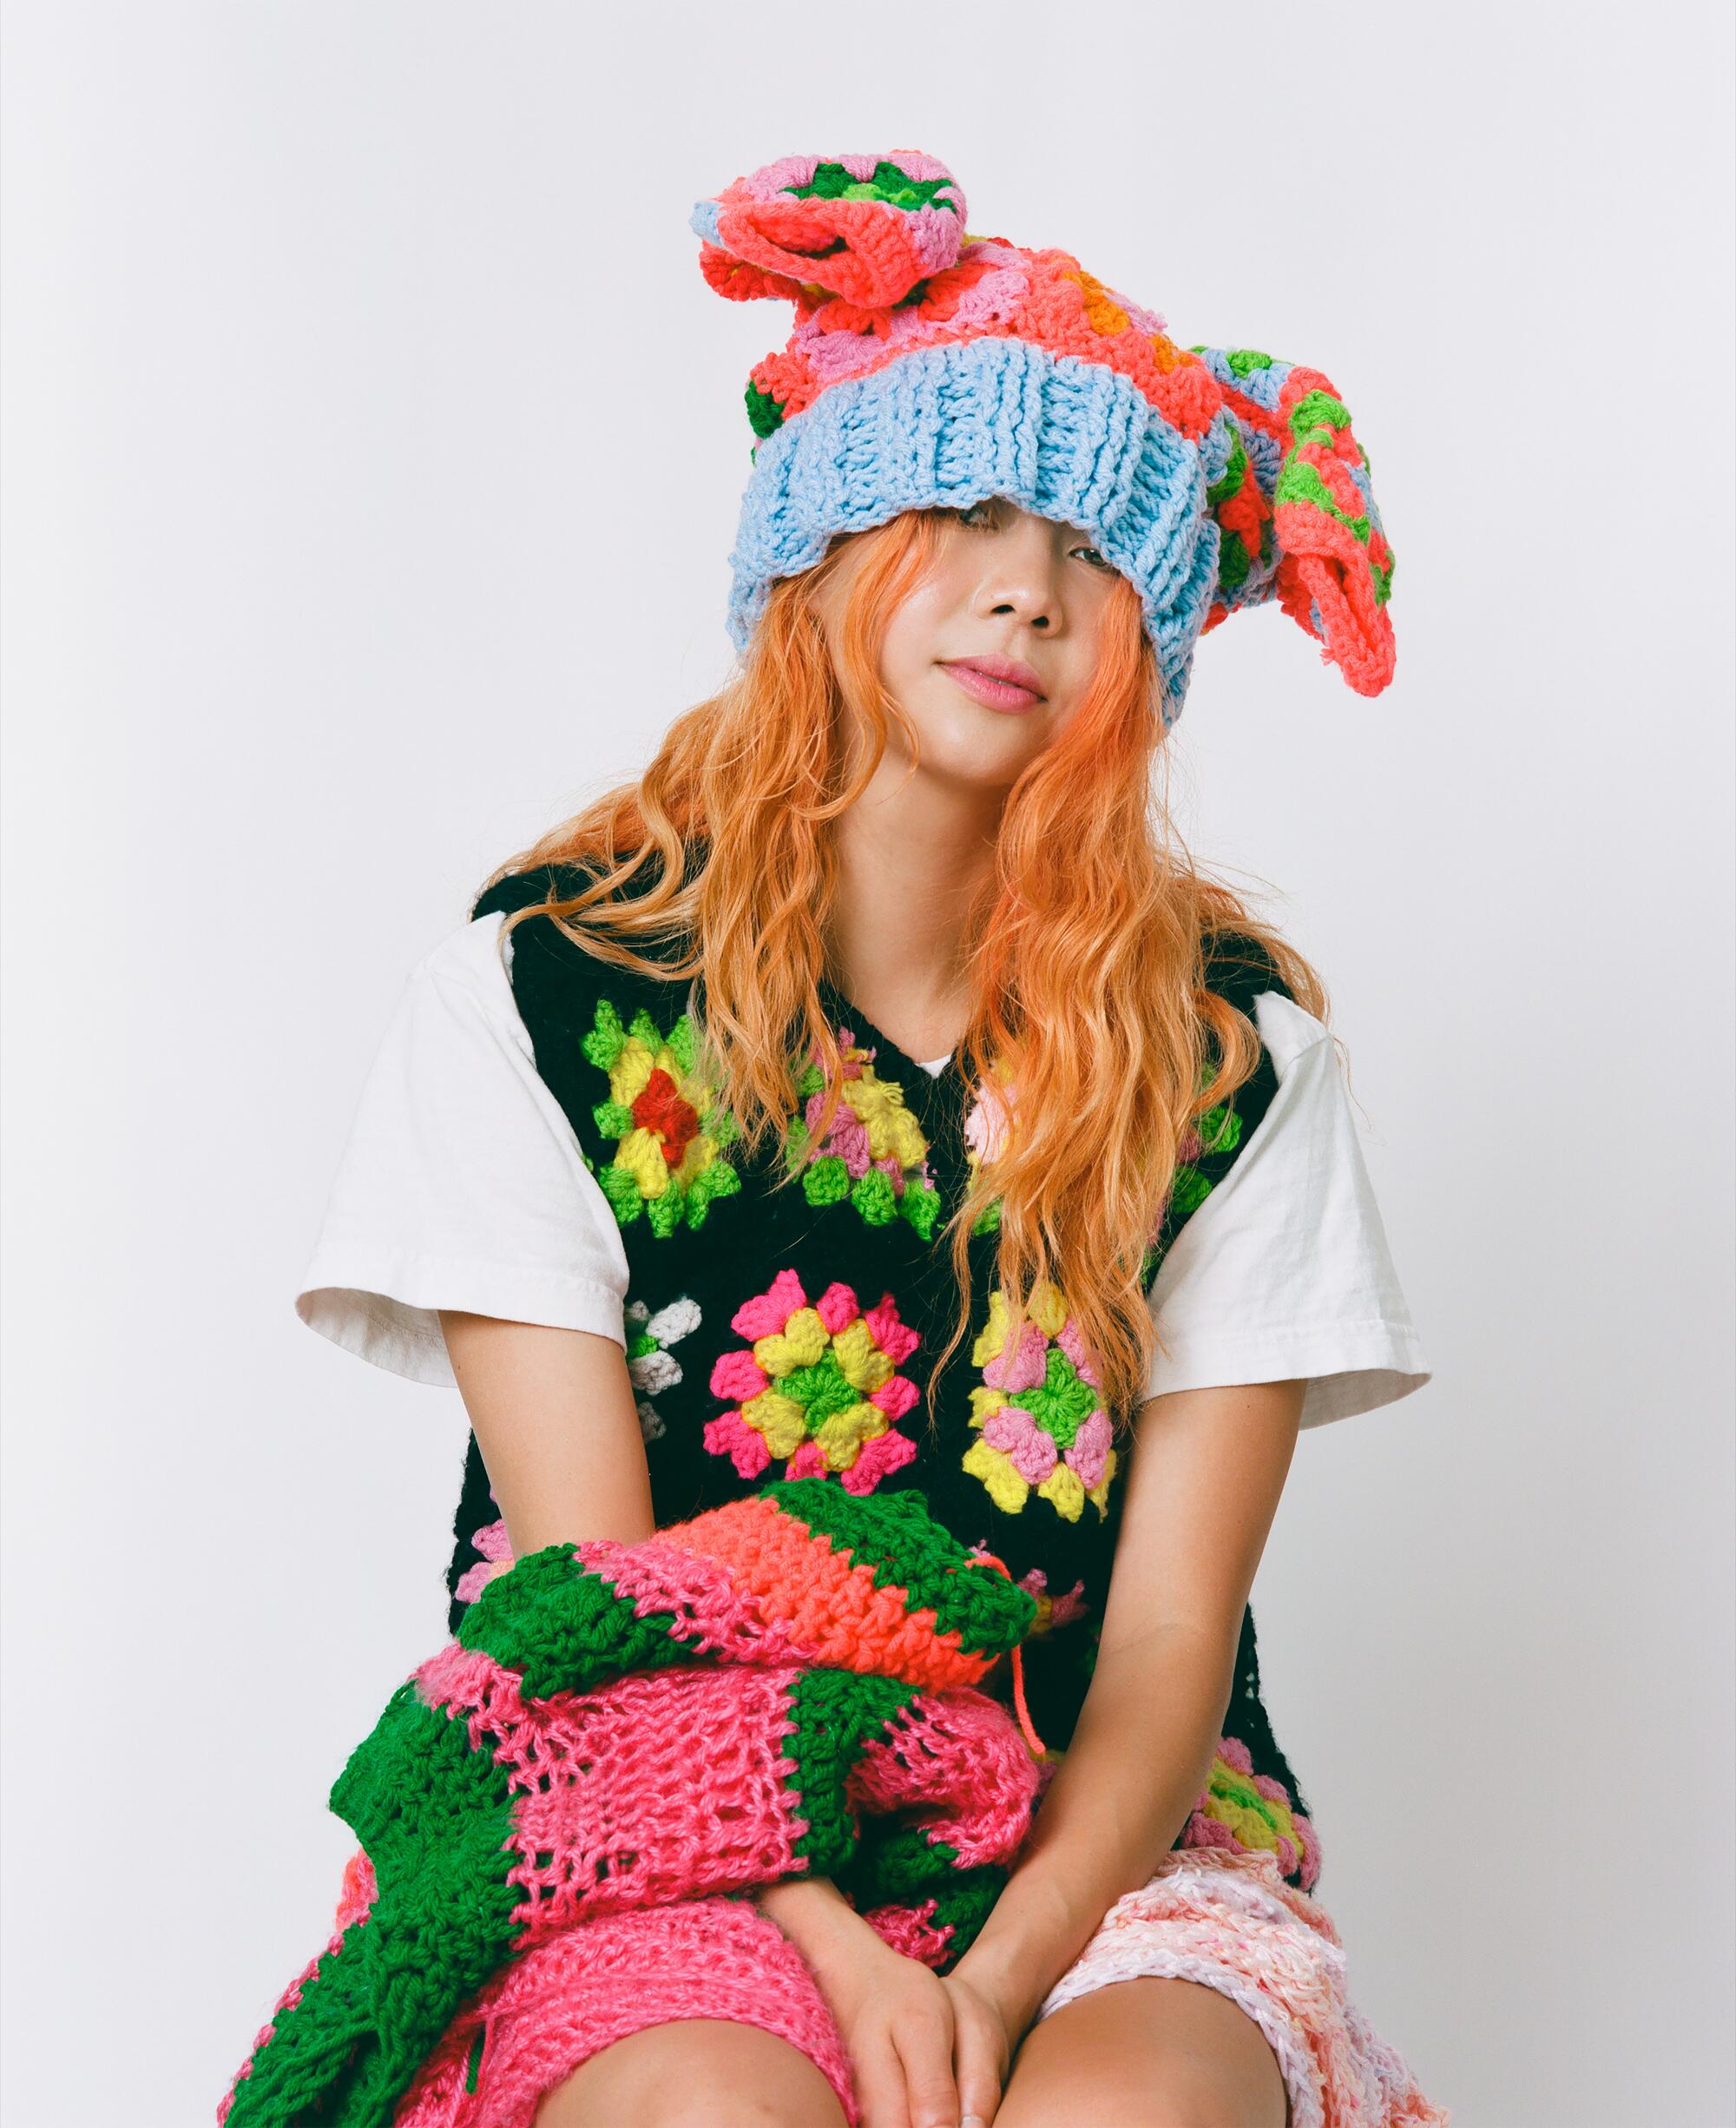 A woman with orange hair wears a fully crocheted colorful outfit.